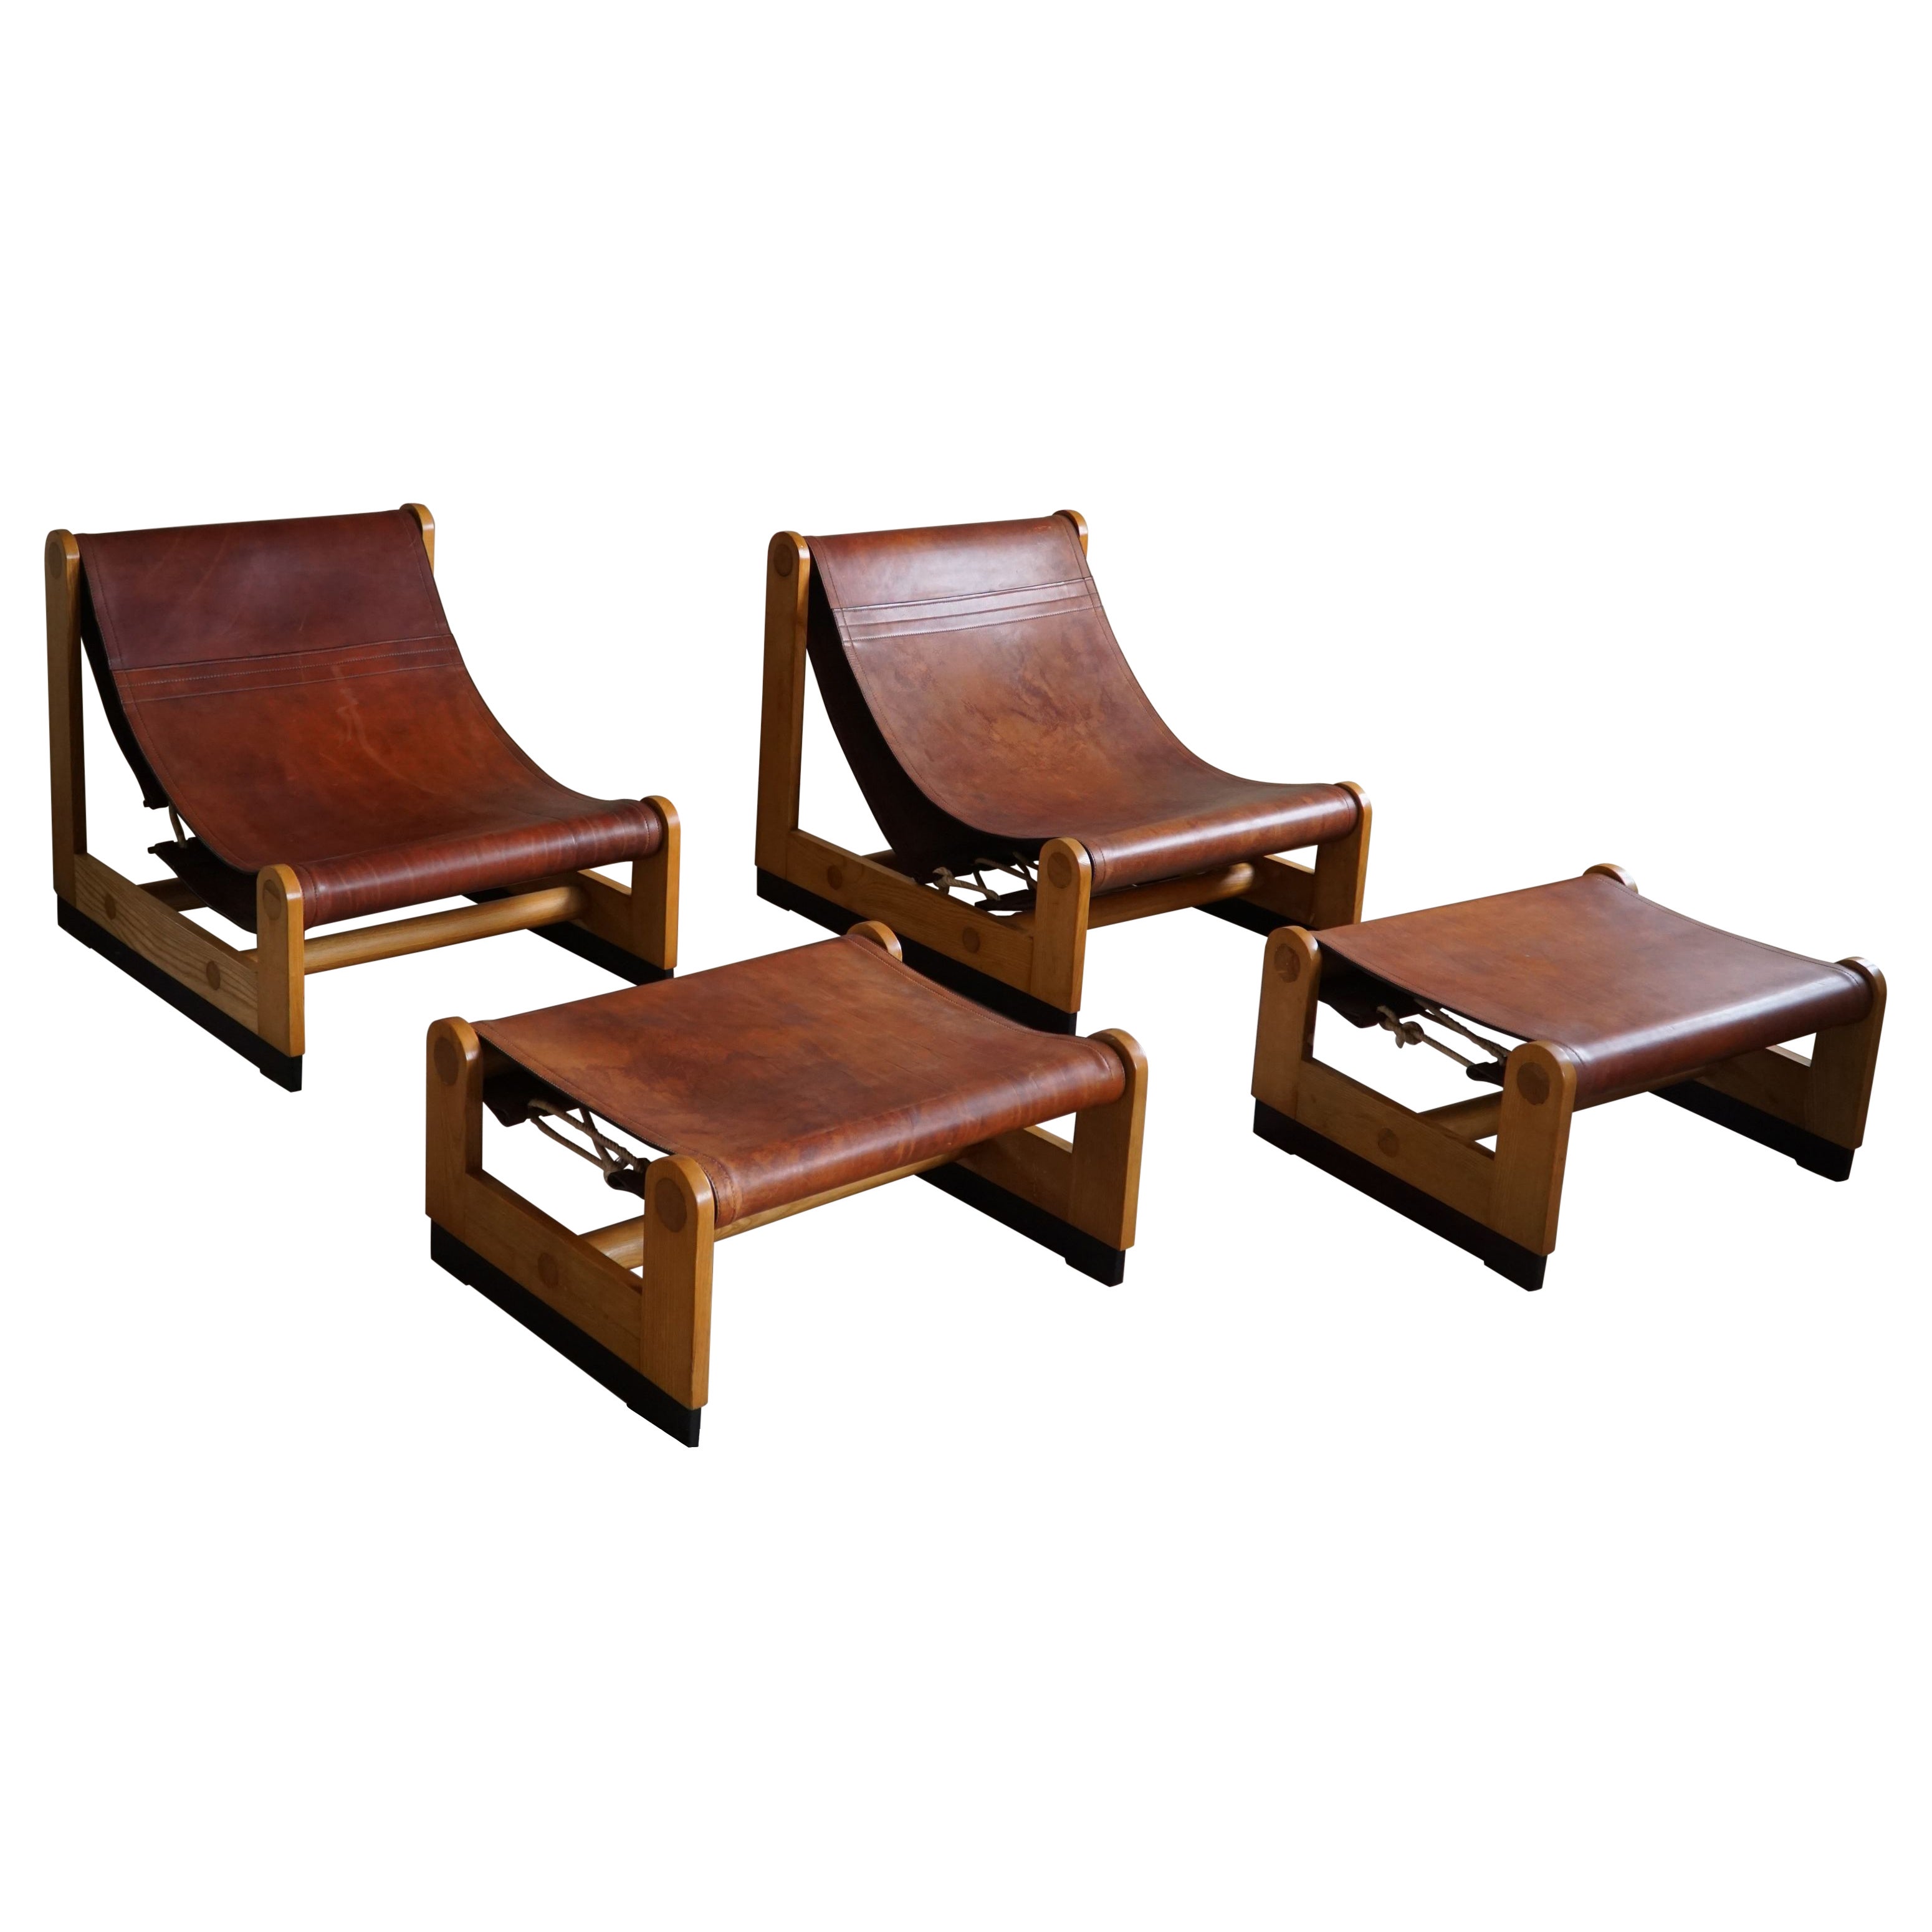 Francesco Lucianetti, Lounge Chairs in Leather & Elm, Italian Modern, 1960s For Sale